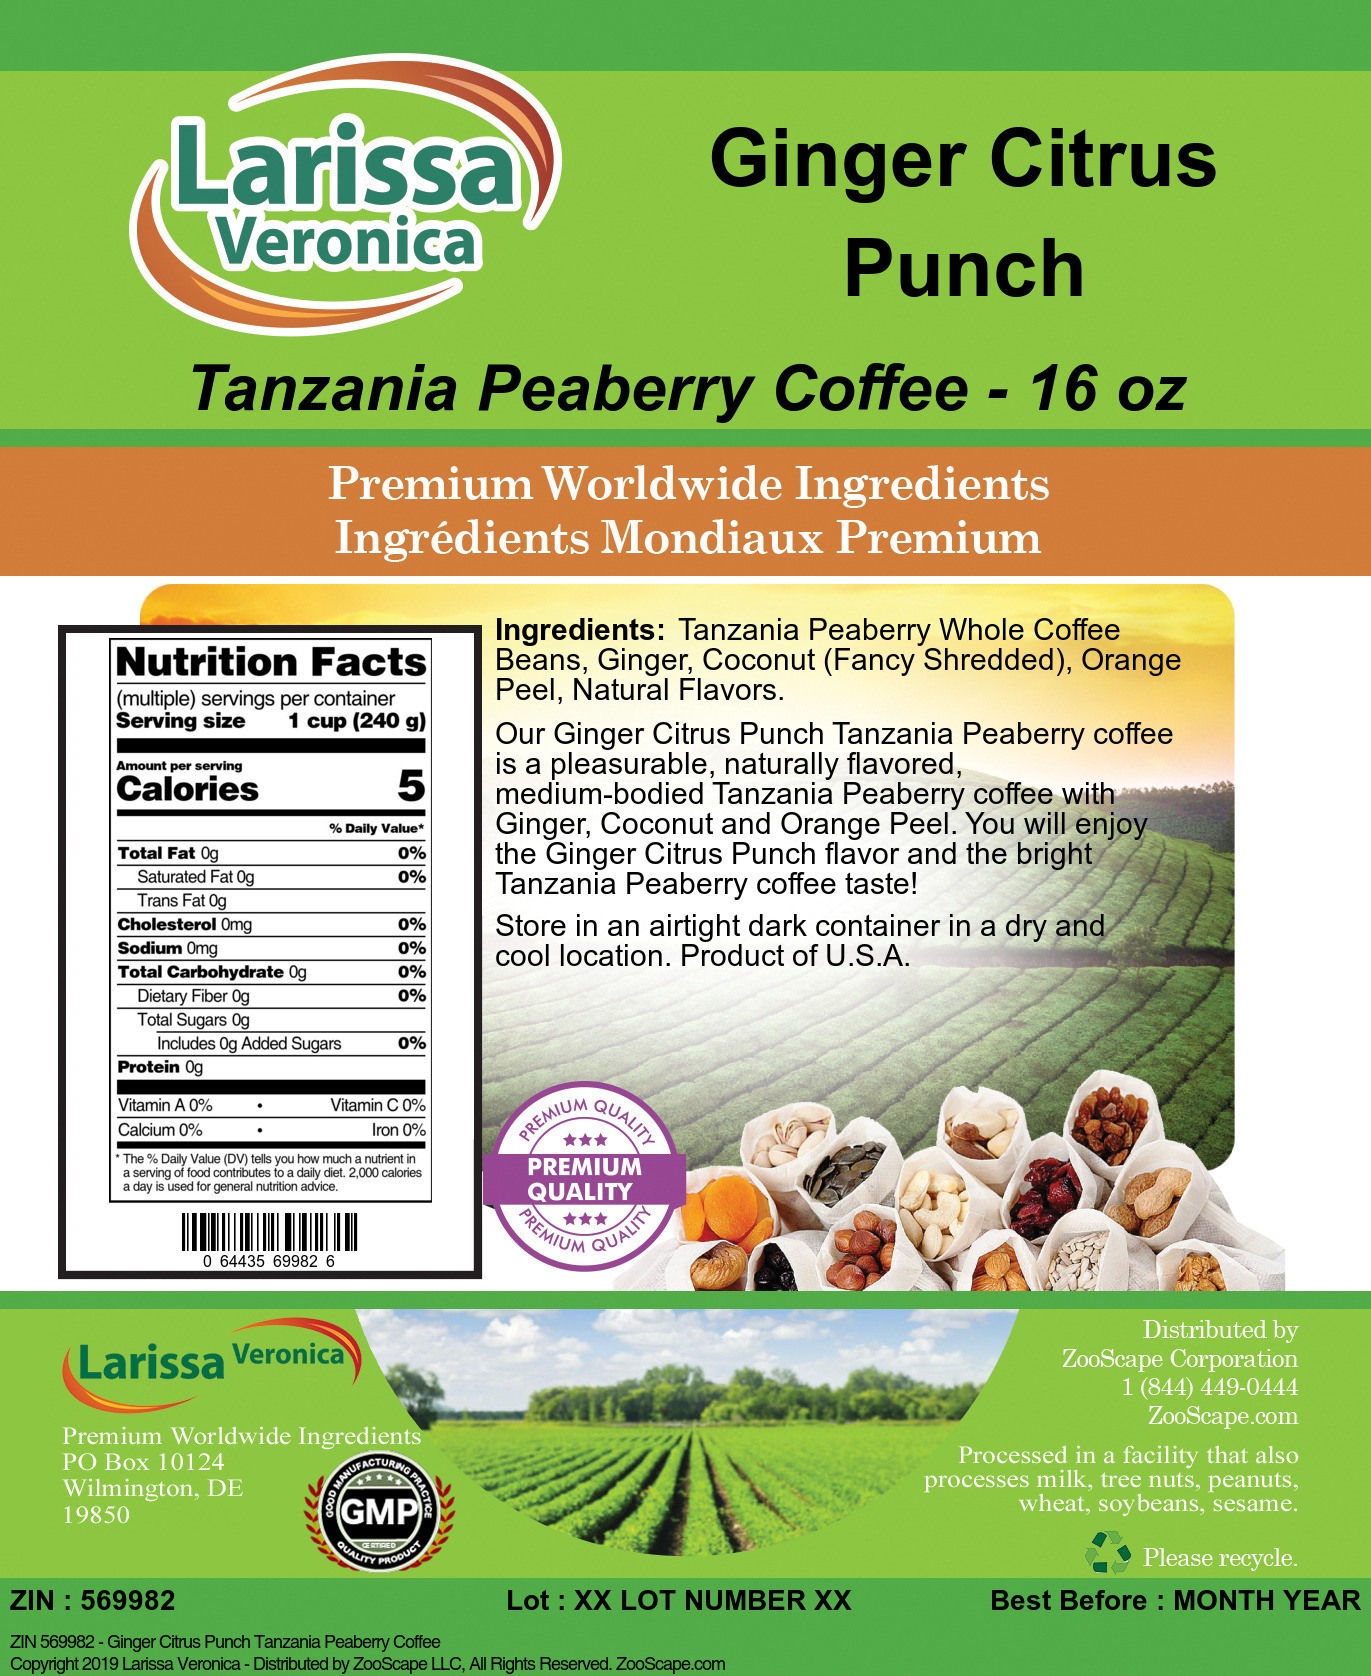 Ginger Citrus Punch Tanzania Peaberry Coffee - Label